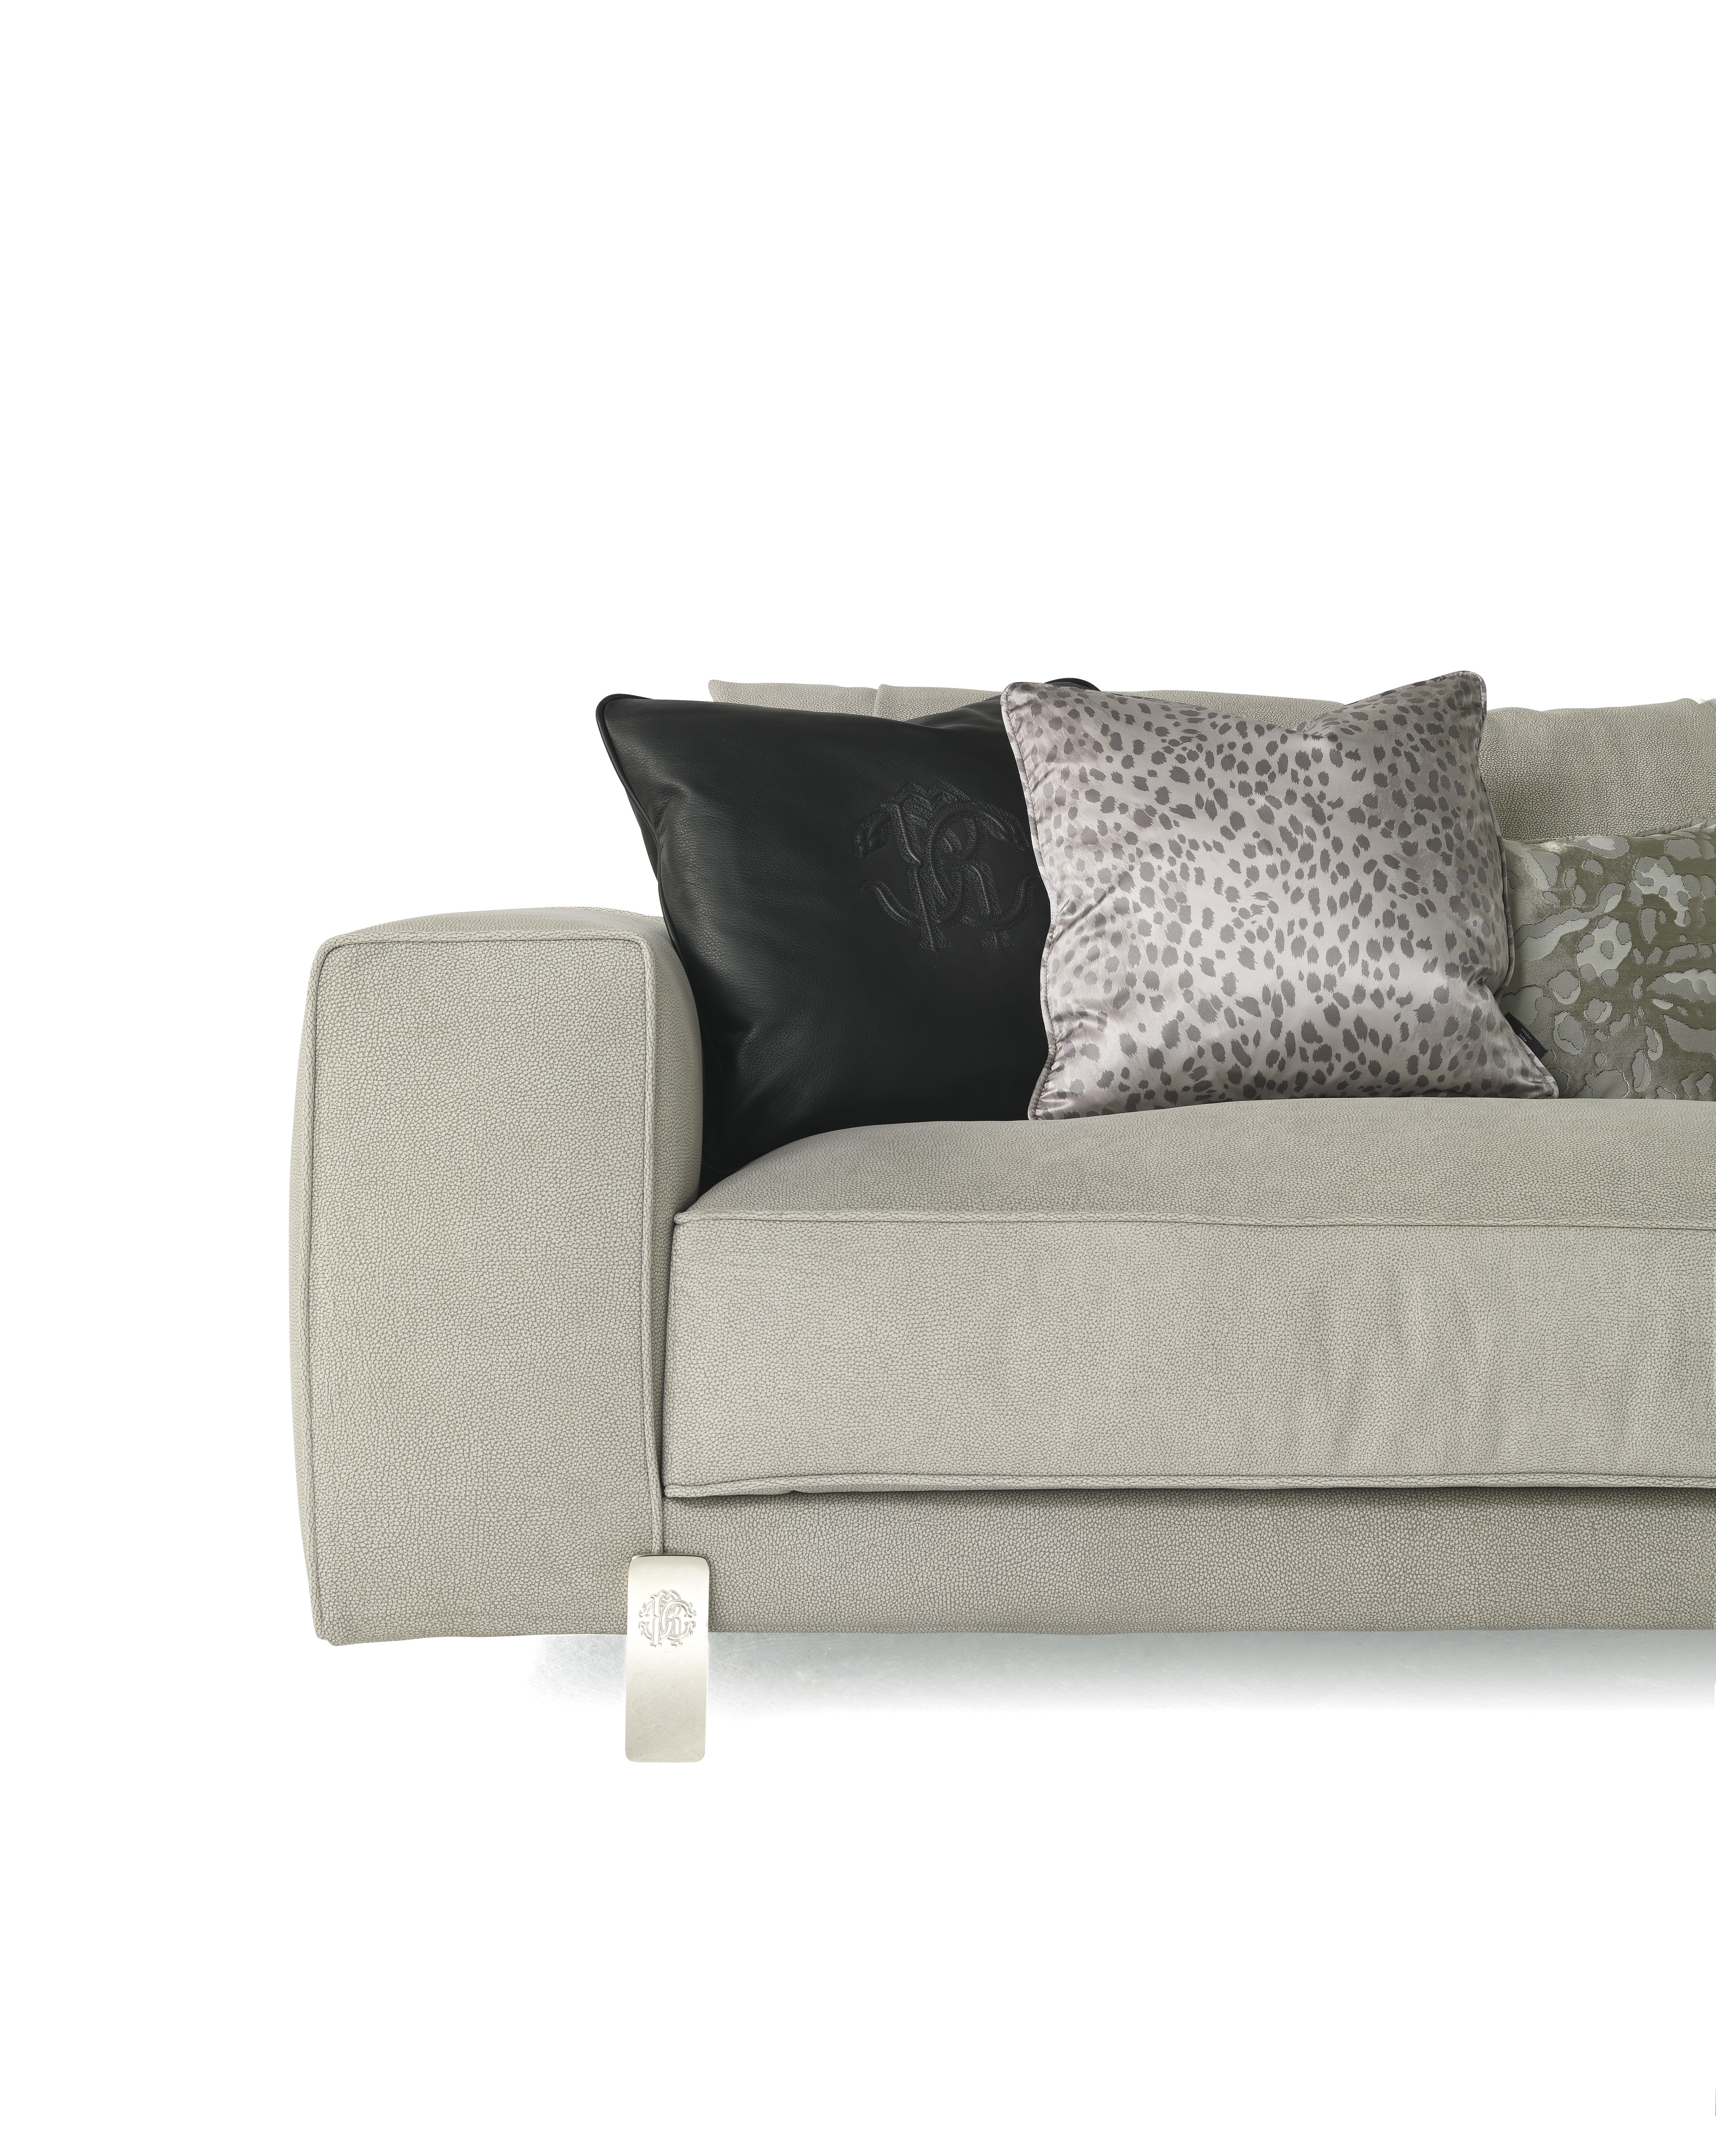 Modern 21st Century Caicos 3-Seater Sofa in Leather by Roberto Cavalli Home Interiors  For Sale